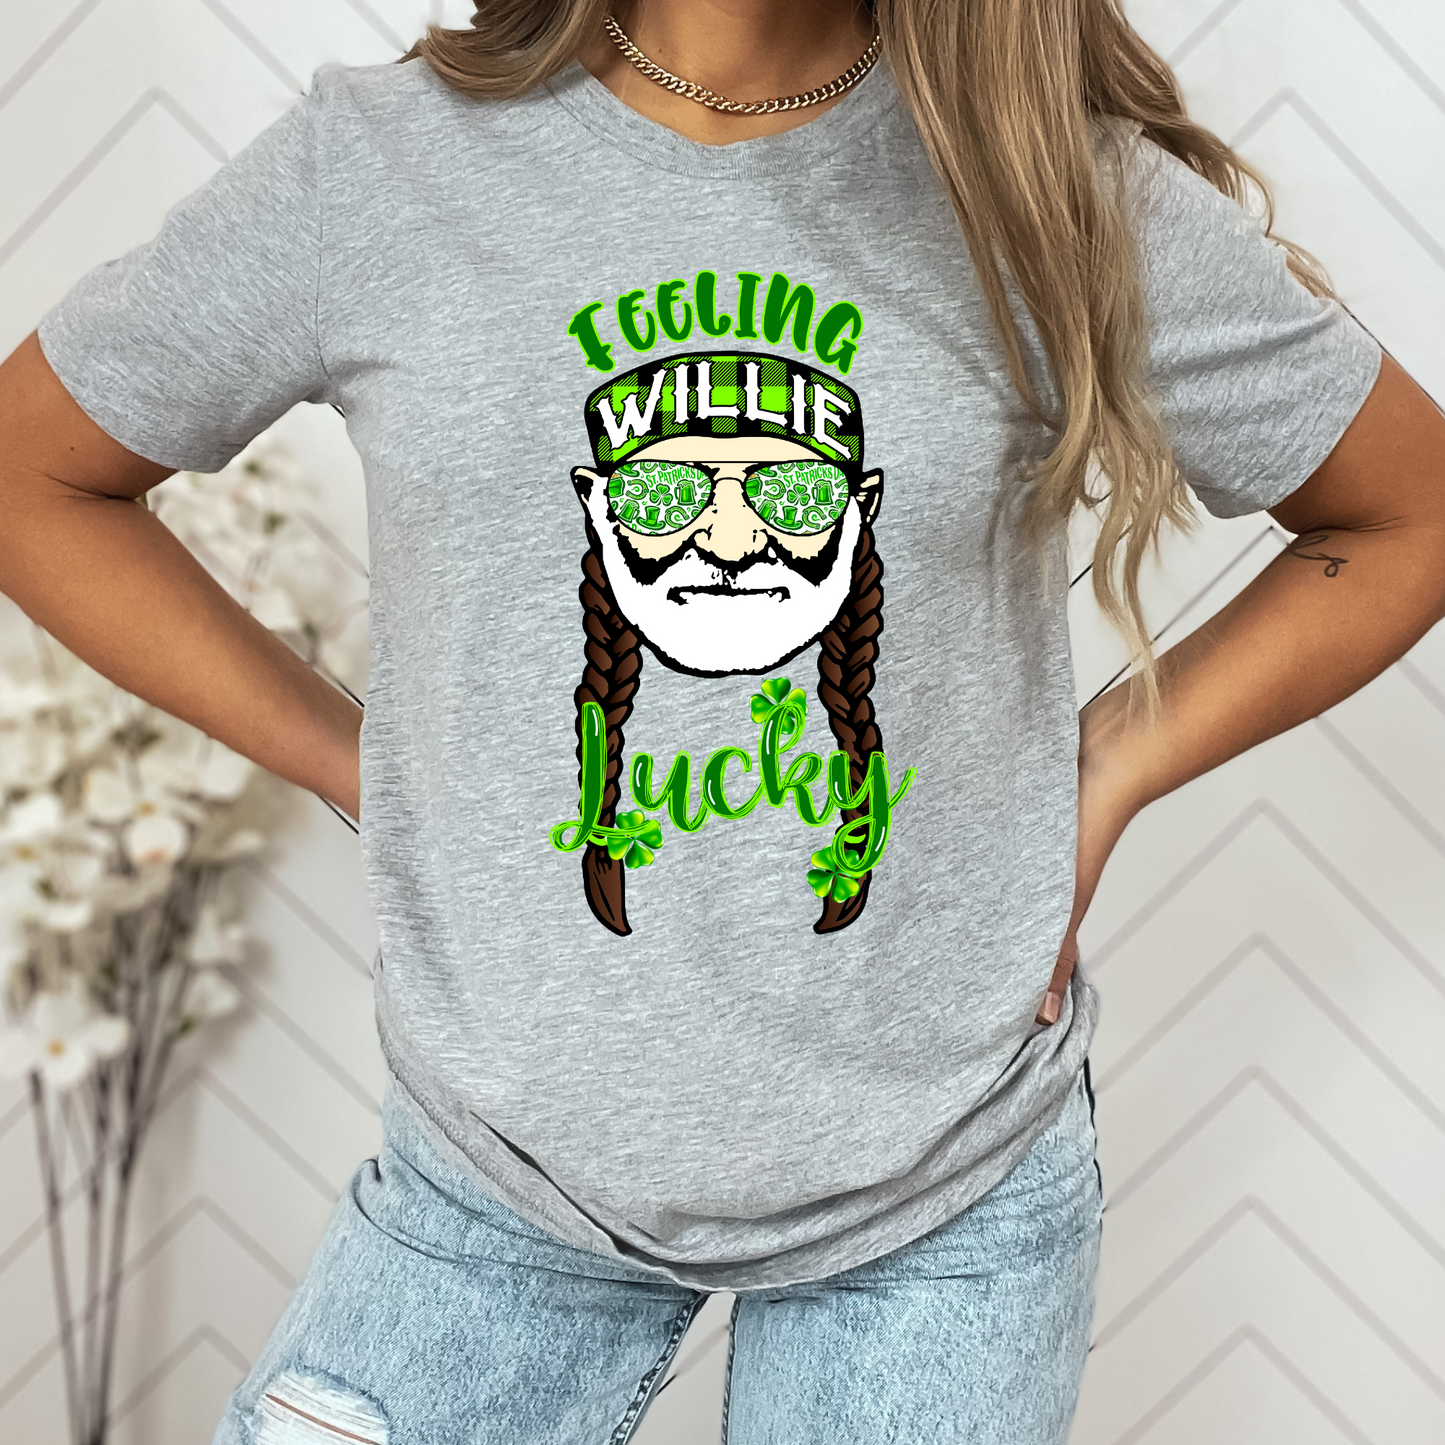 Willie Lucky Graphic Tee